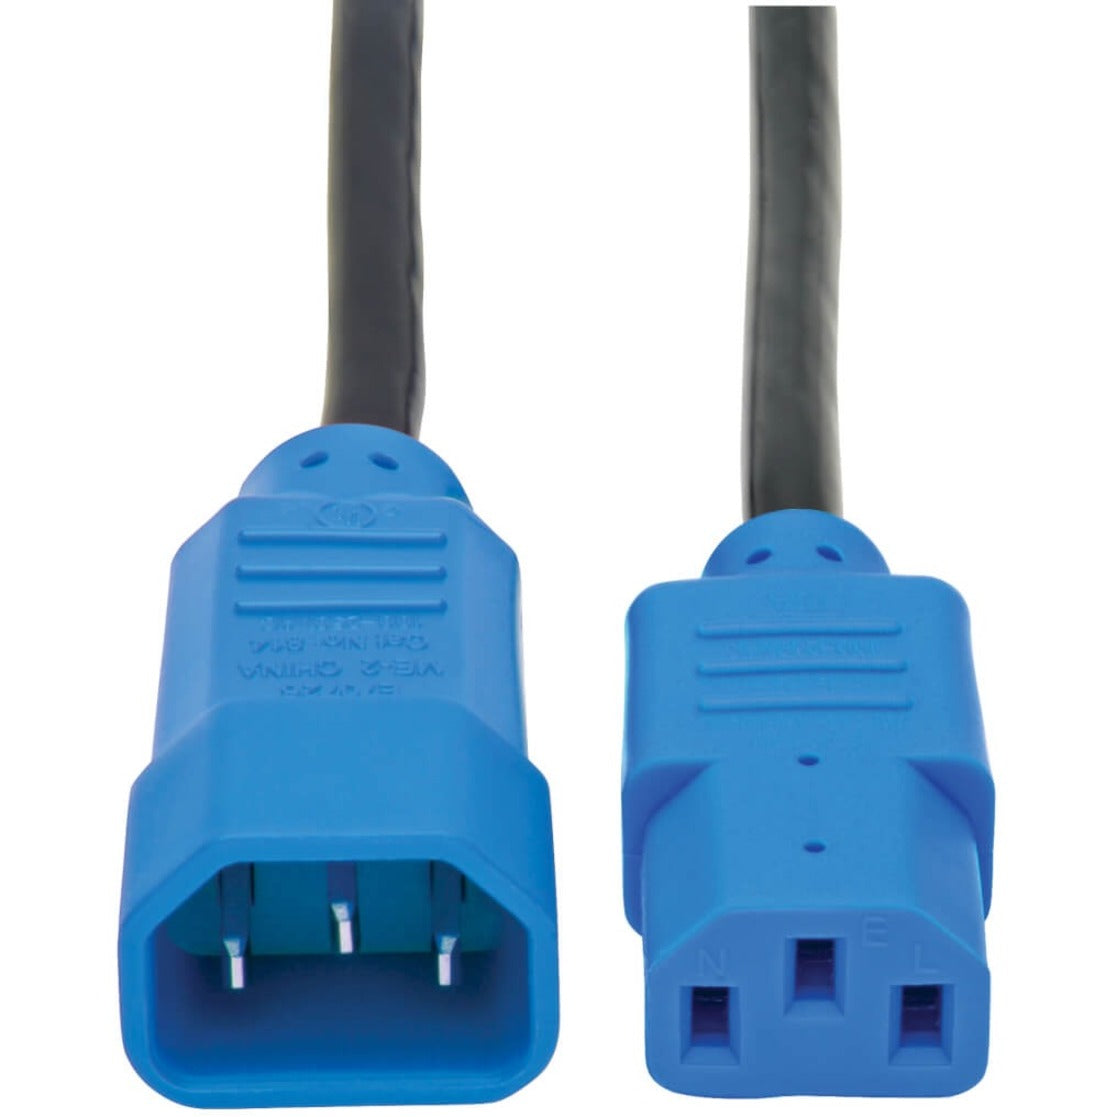 Tripp Lite P004-004-BL 4-ft. 18 AWG Power Cord with Blue Connectors, for Computers, Printers, Monitors